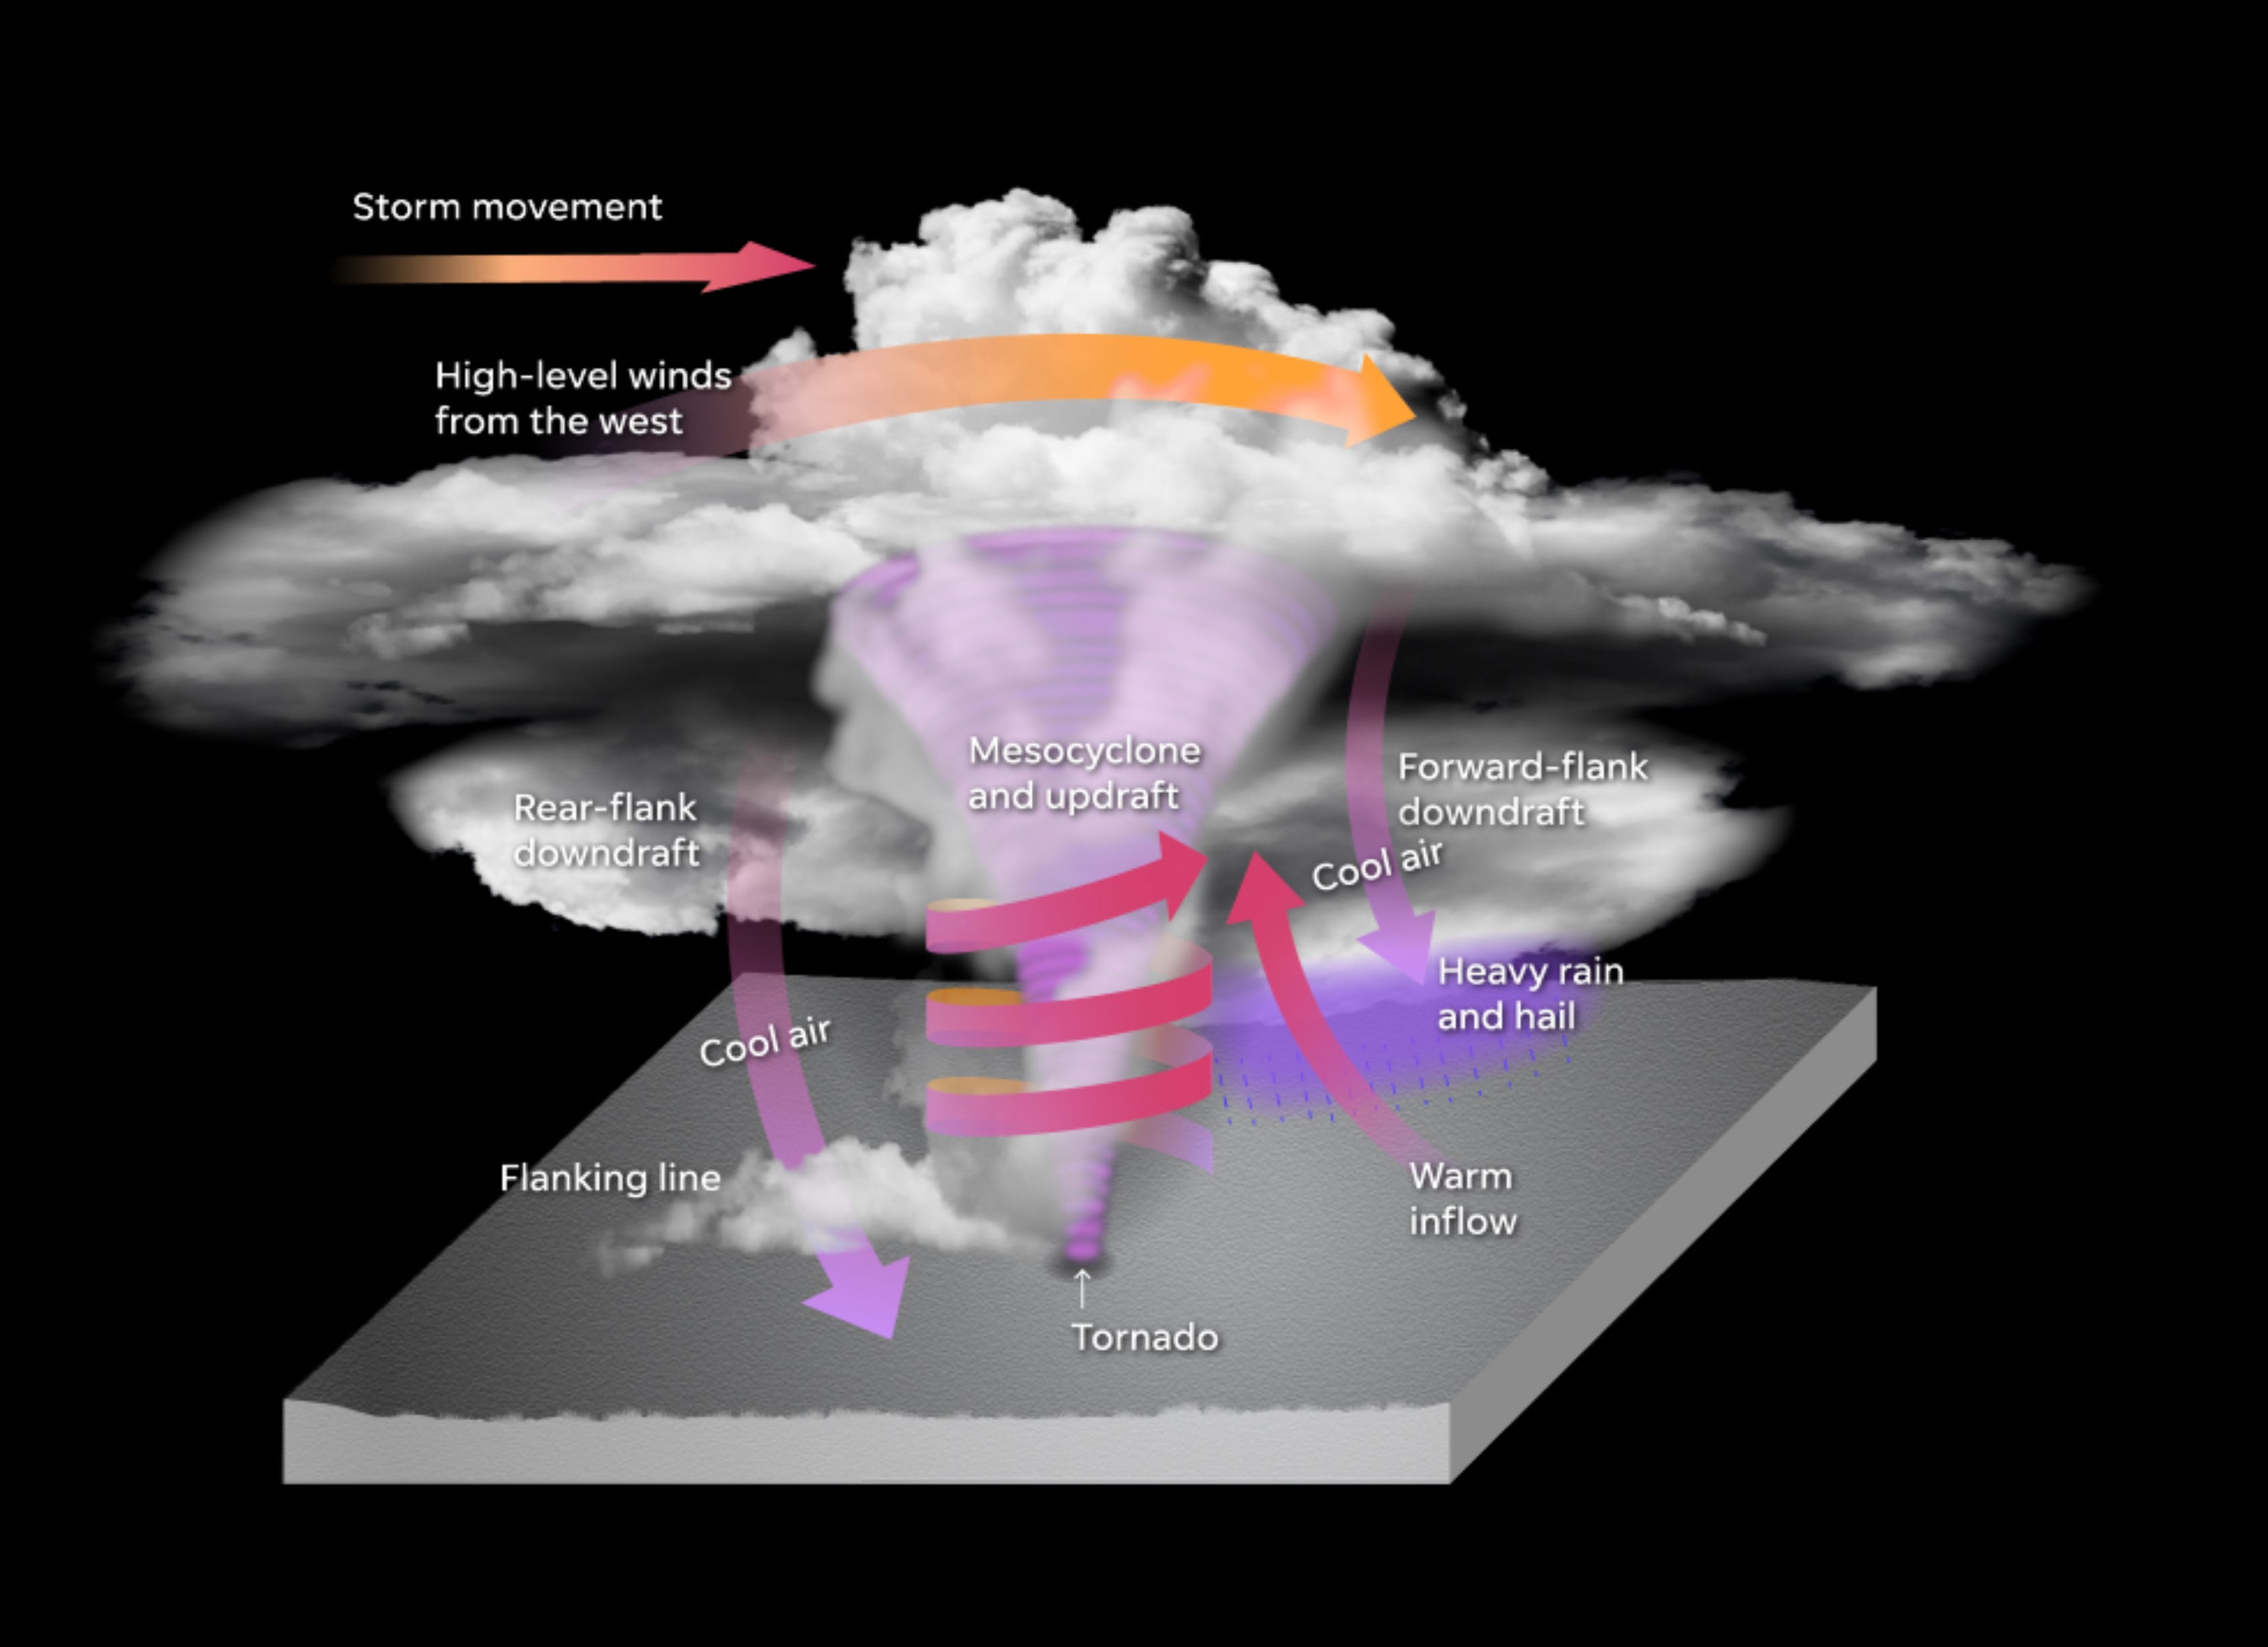 Tornadoes can form within the spinning updraft. Precipitation in a forward flank downdraft and in a rear flank downdraft squeeze the rotating updraft to make it spin faster and form the tornado.